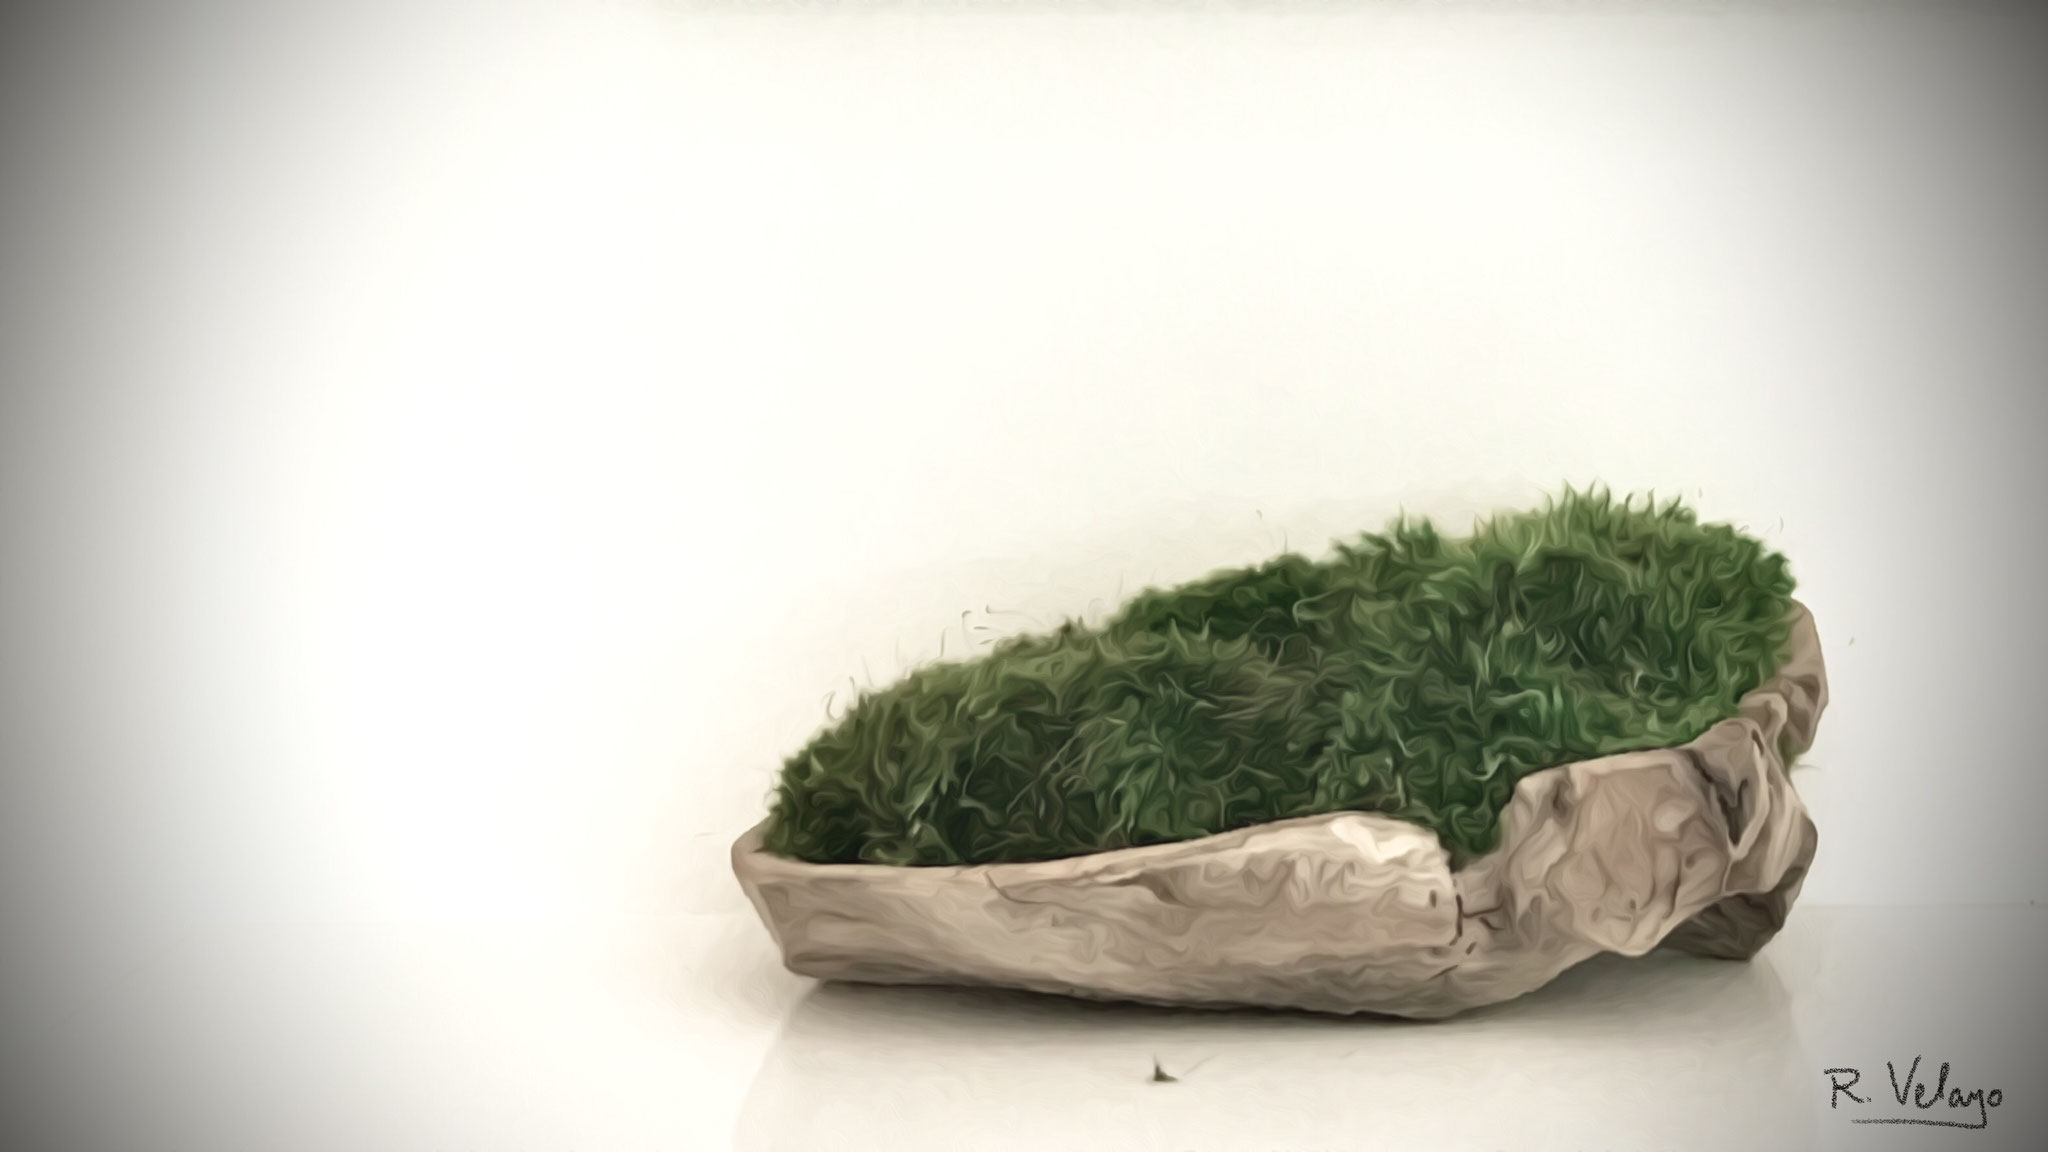 "MOSS ON NATURAL WOOD CONTAINER" [12/03/2021]